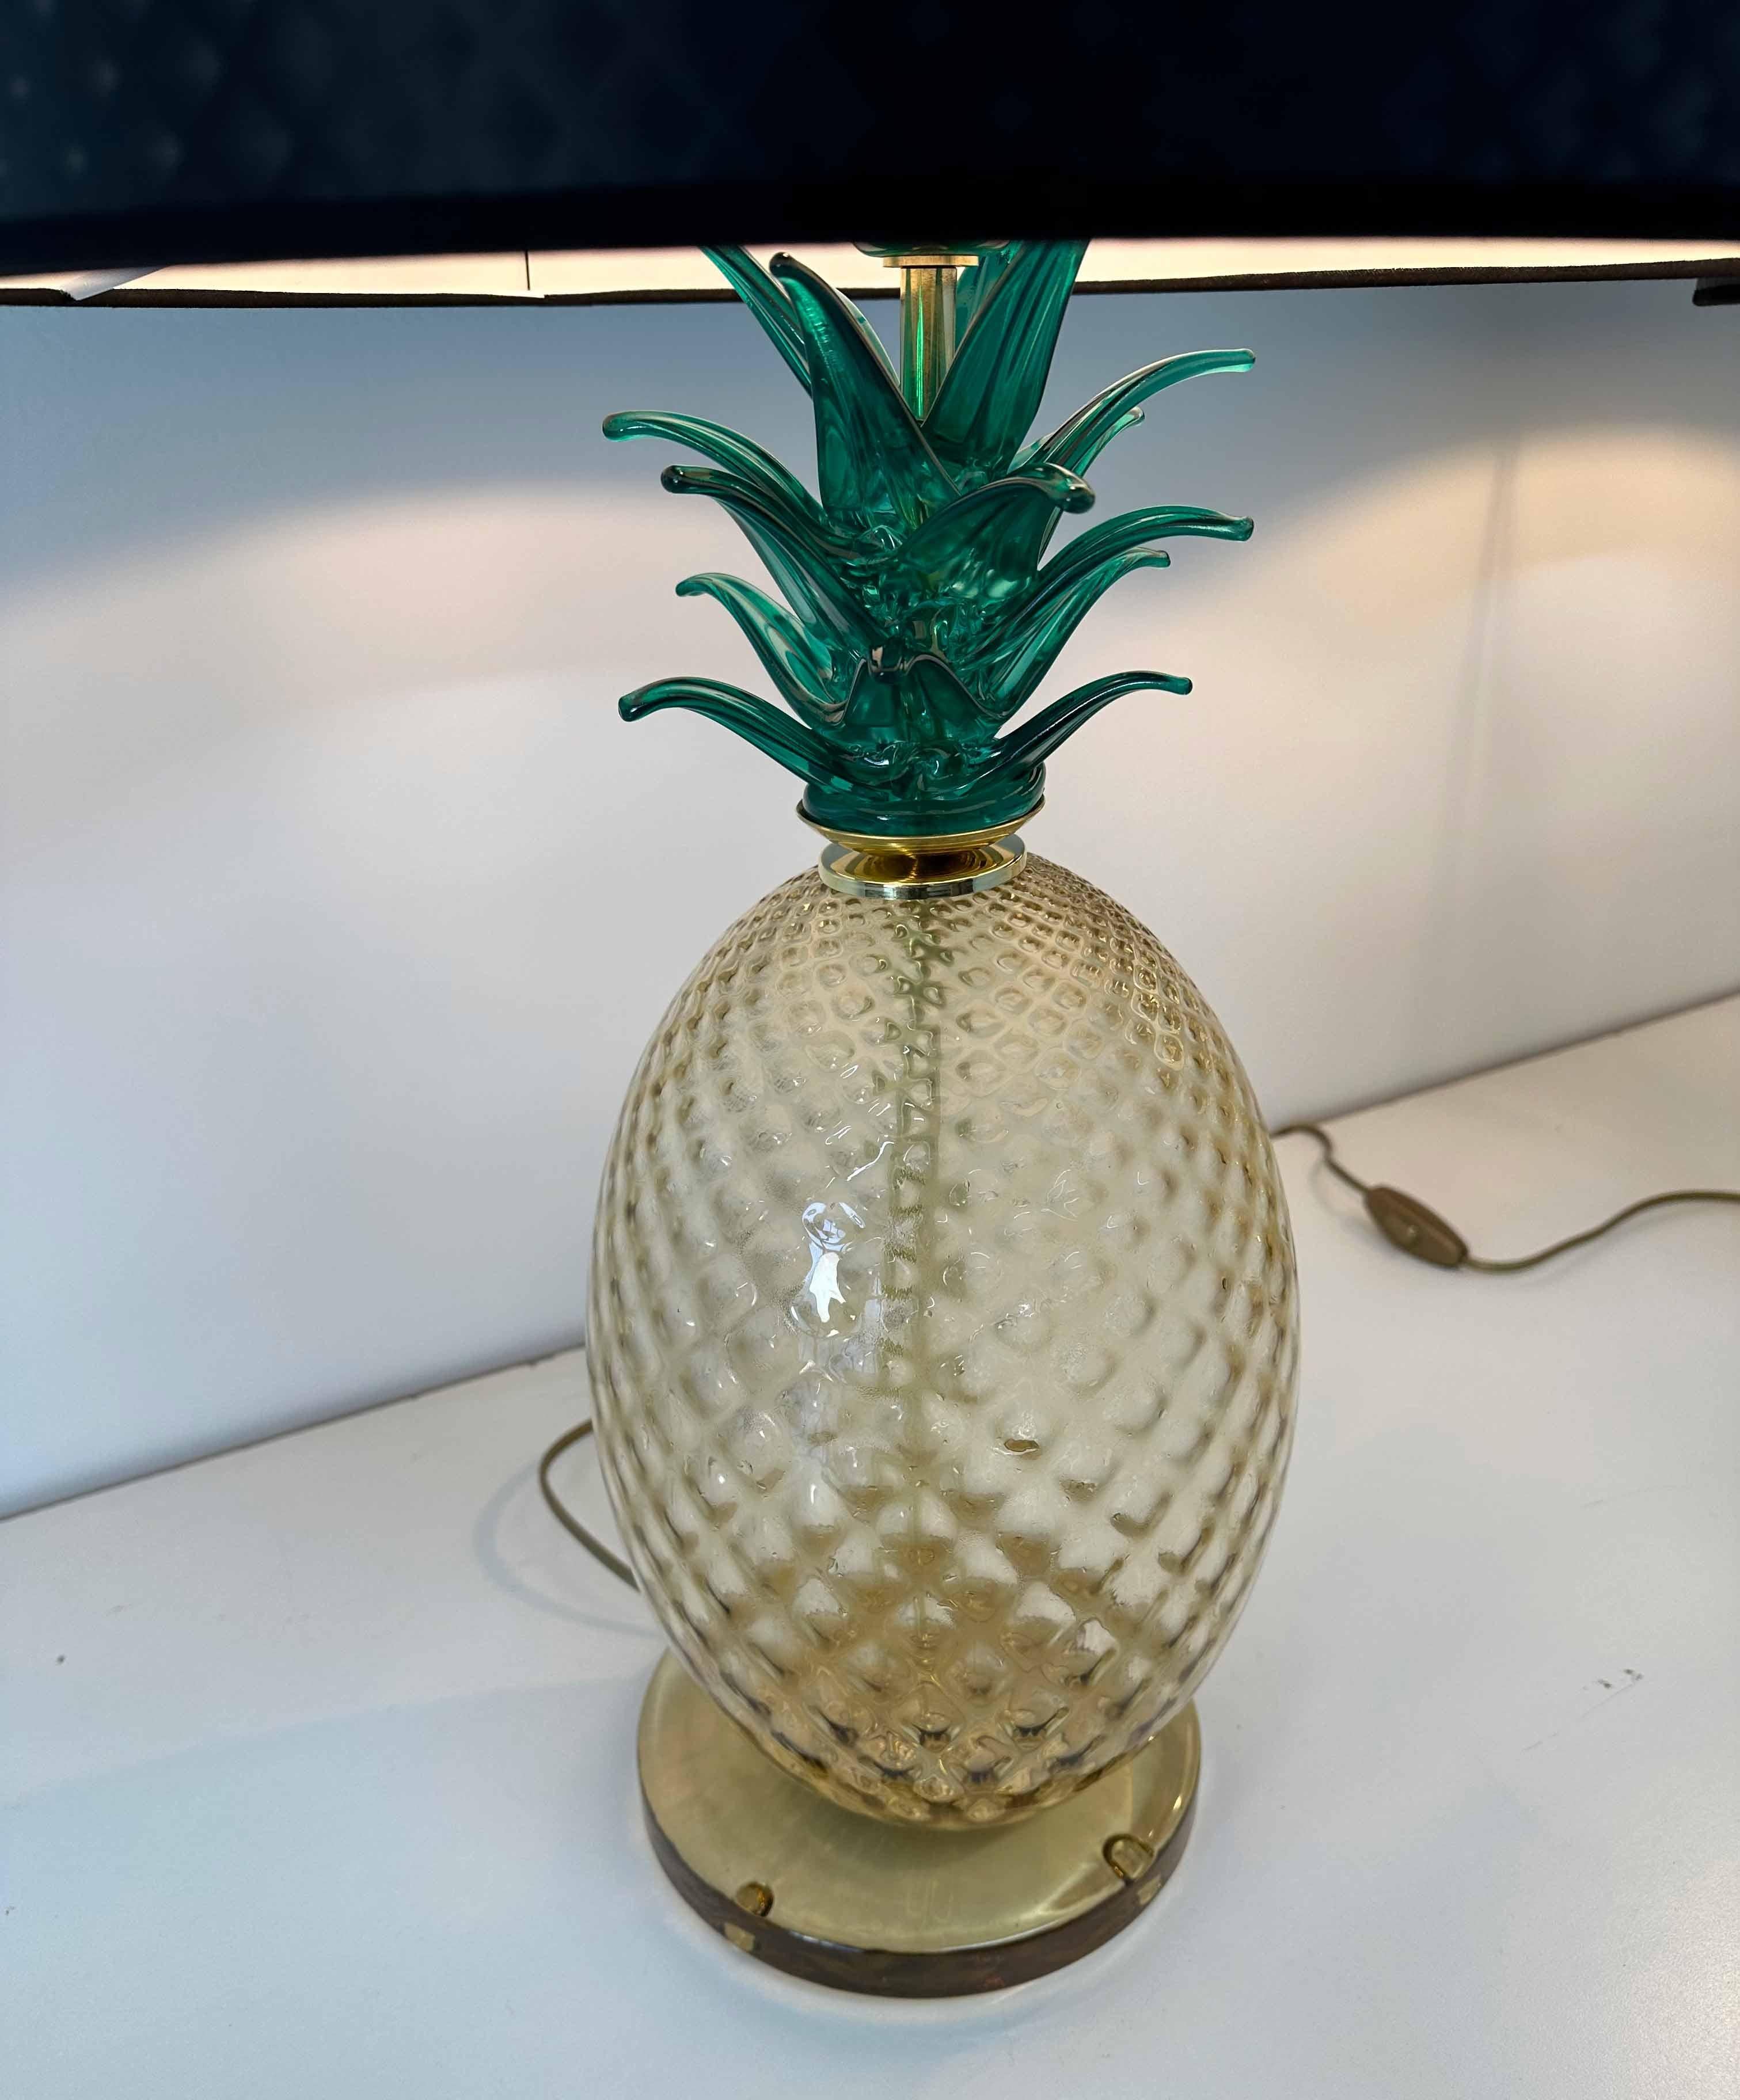 Pair of Italian Art Deco Pineapple Murano Glass Lamps with Lampshades  For Sale 2